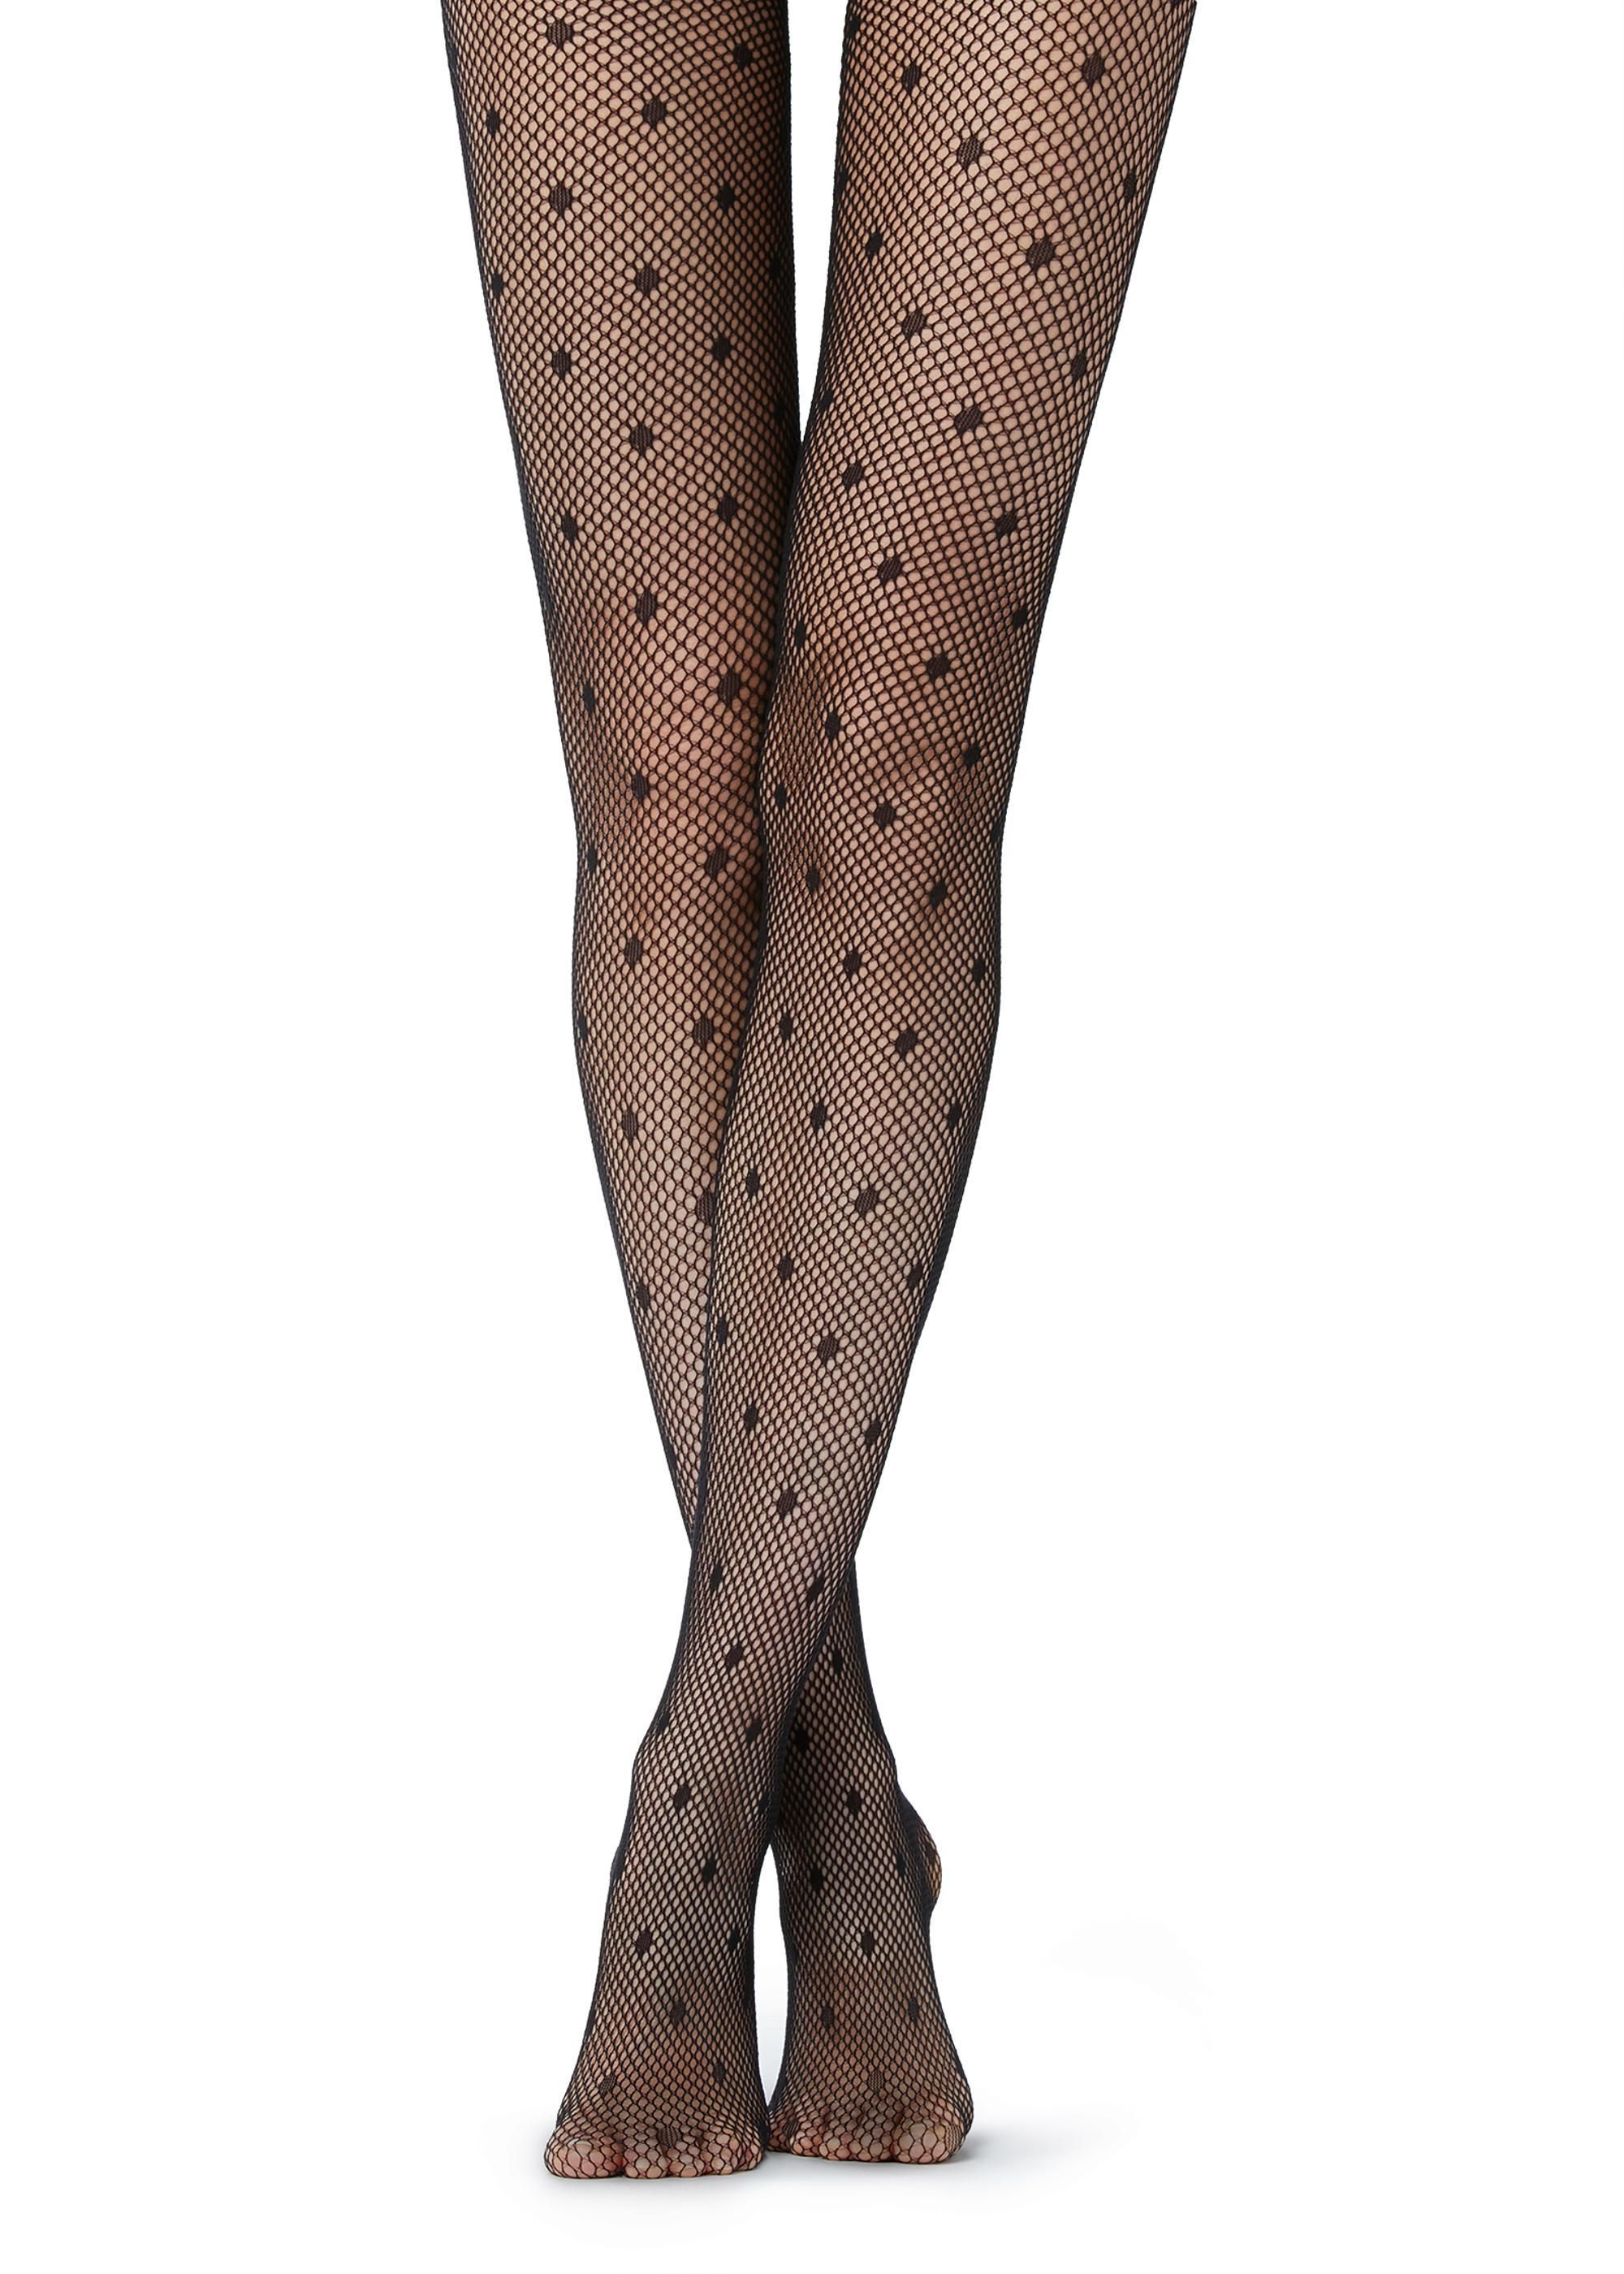 The Long History of Fishnet Stockings